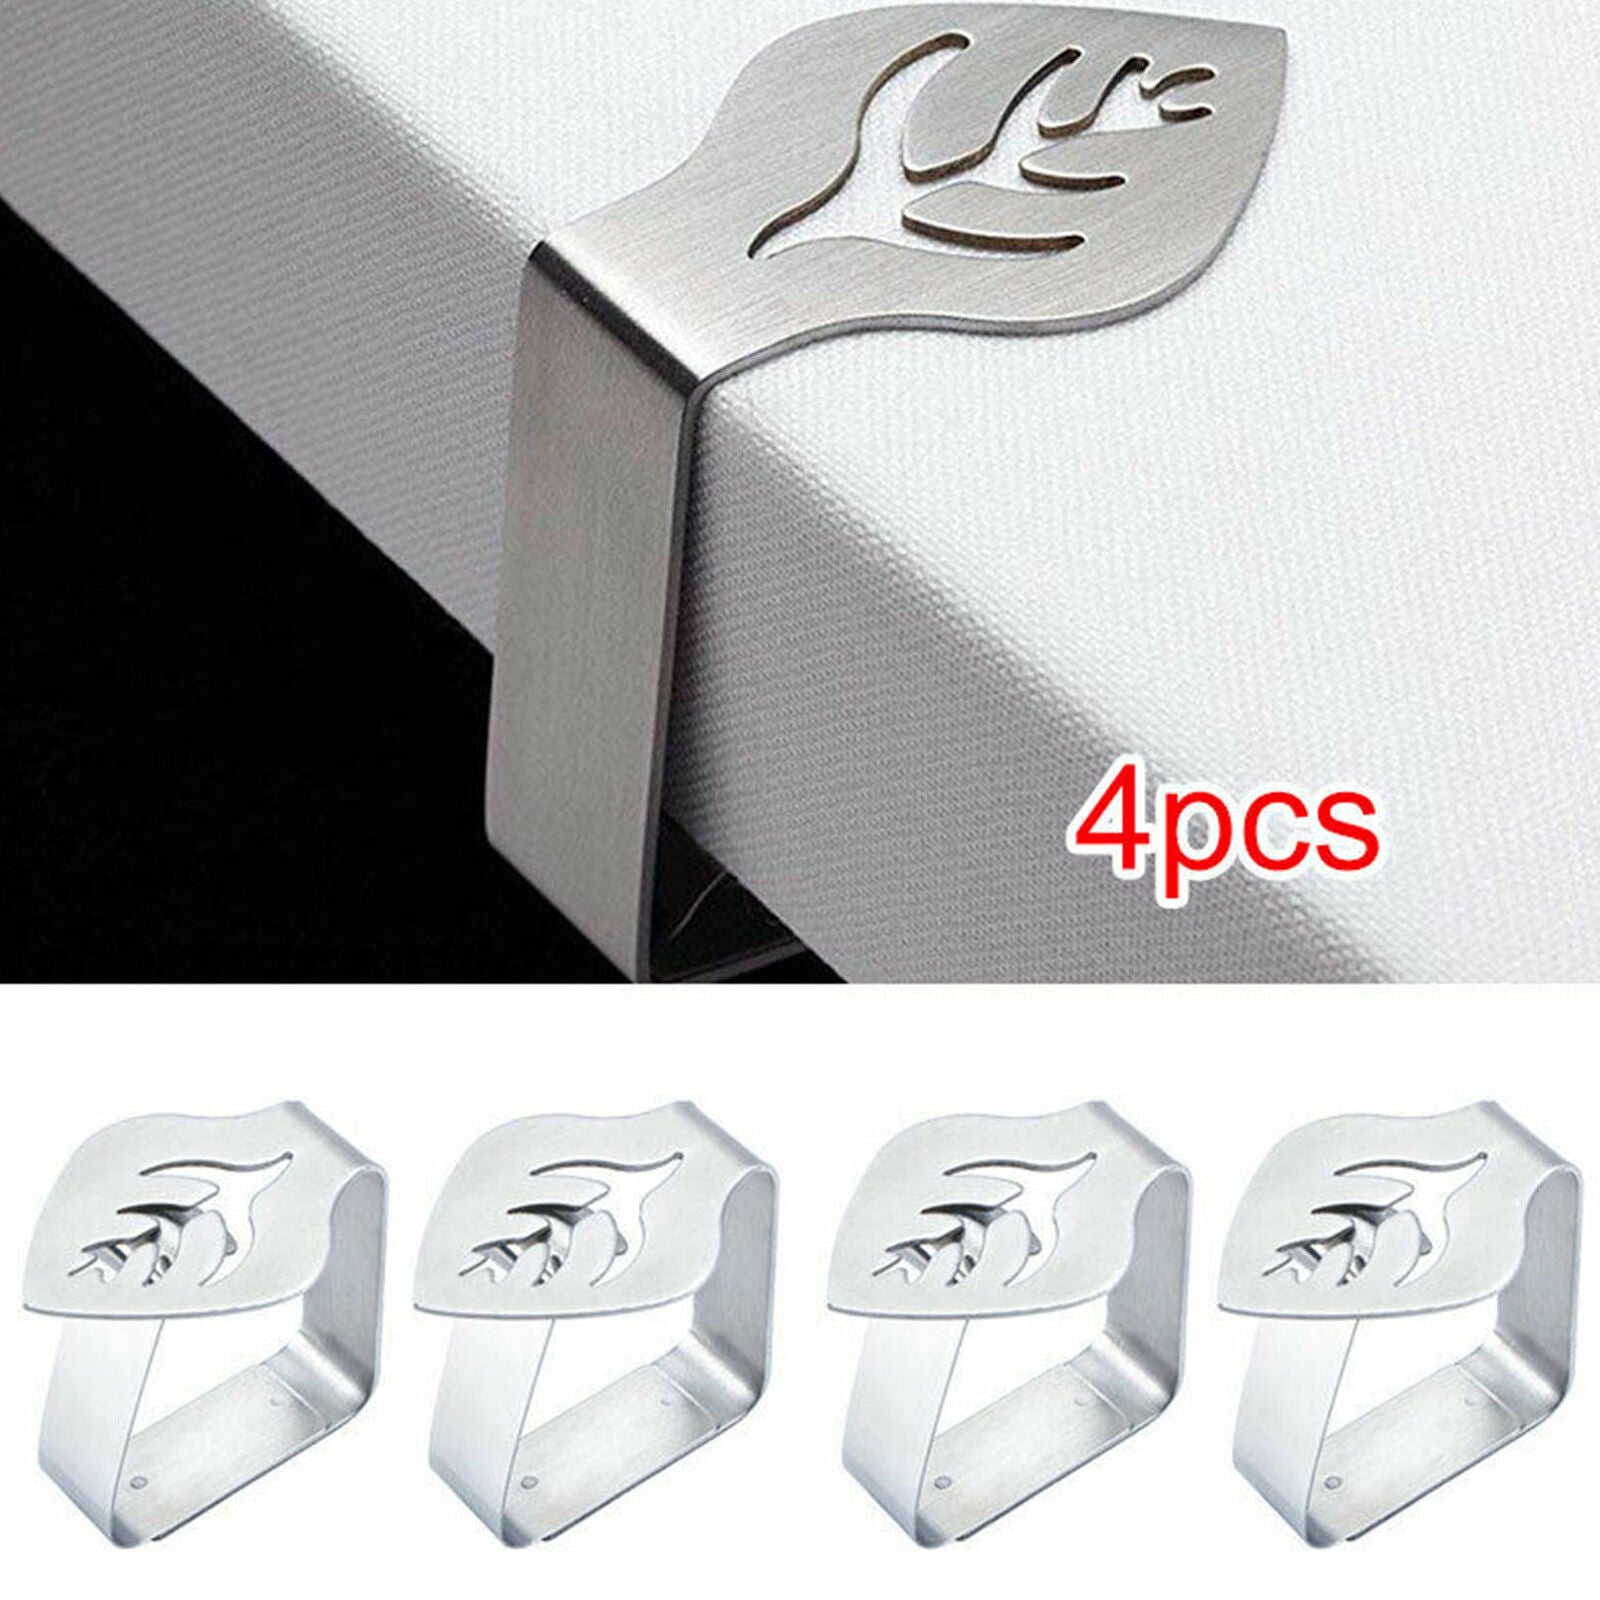 4x Leaf Shaped Table Cloth Clips Stainless Steel Table Cover Pegs Clamp Holder